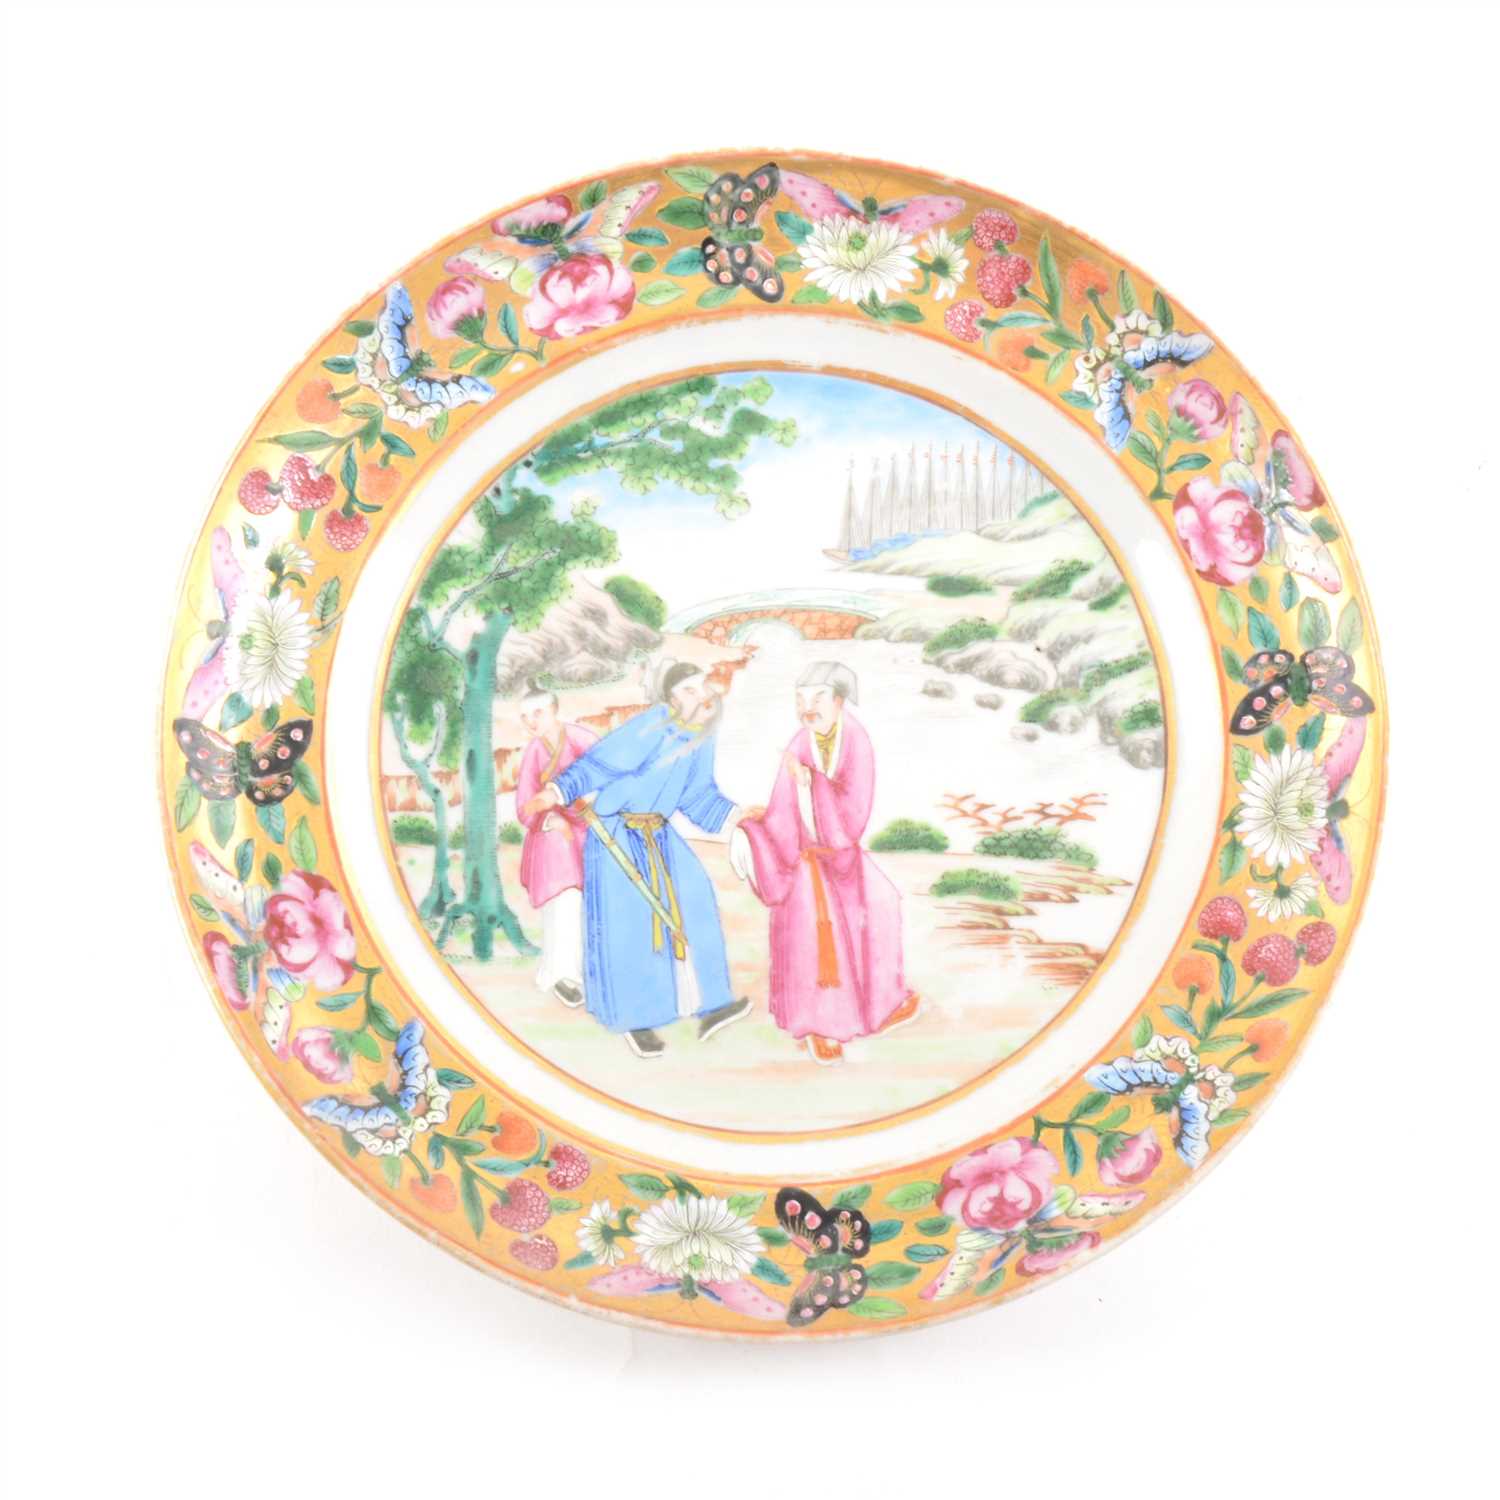 Lot 41 - Chinese export porcelain plate, decorated with figures by a river